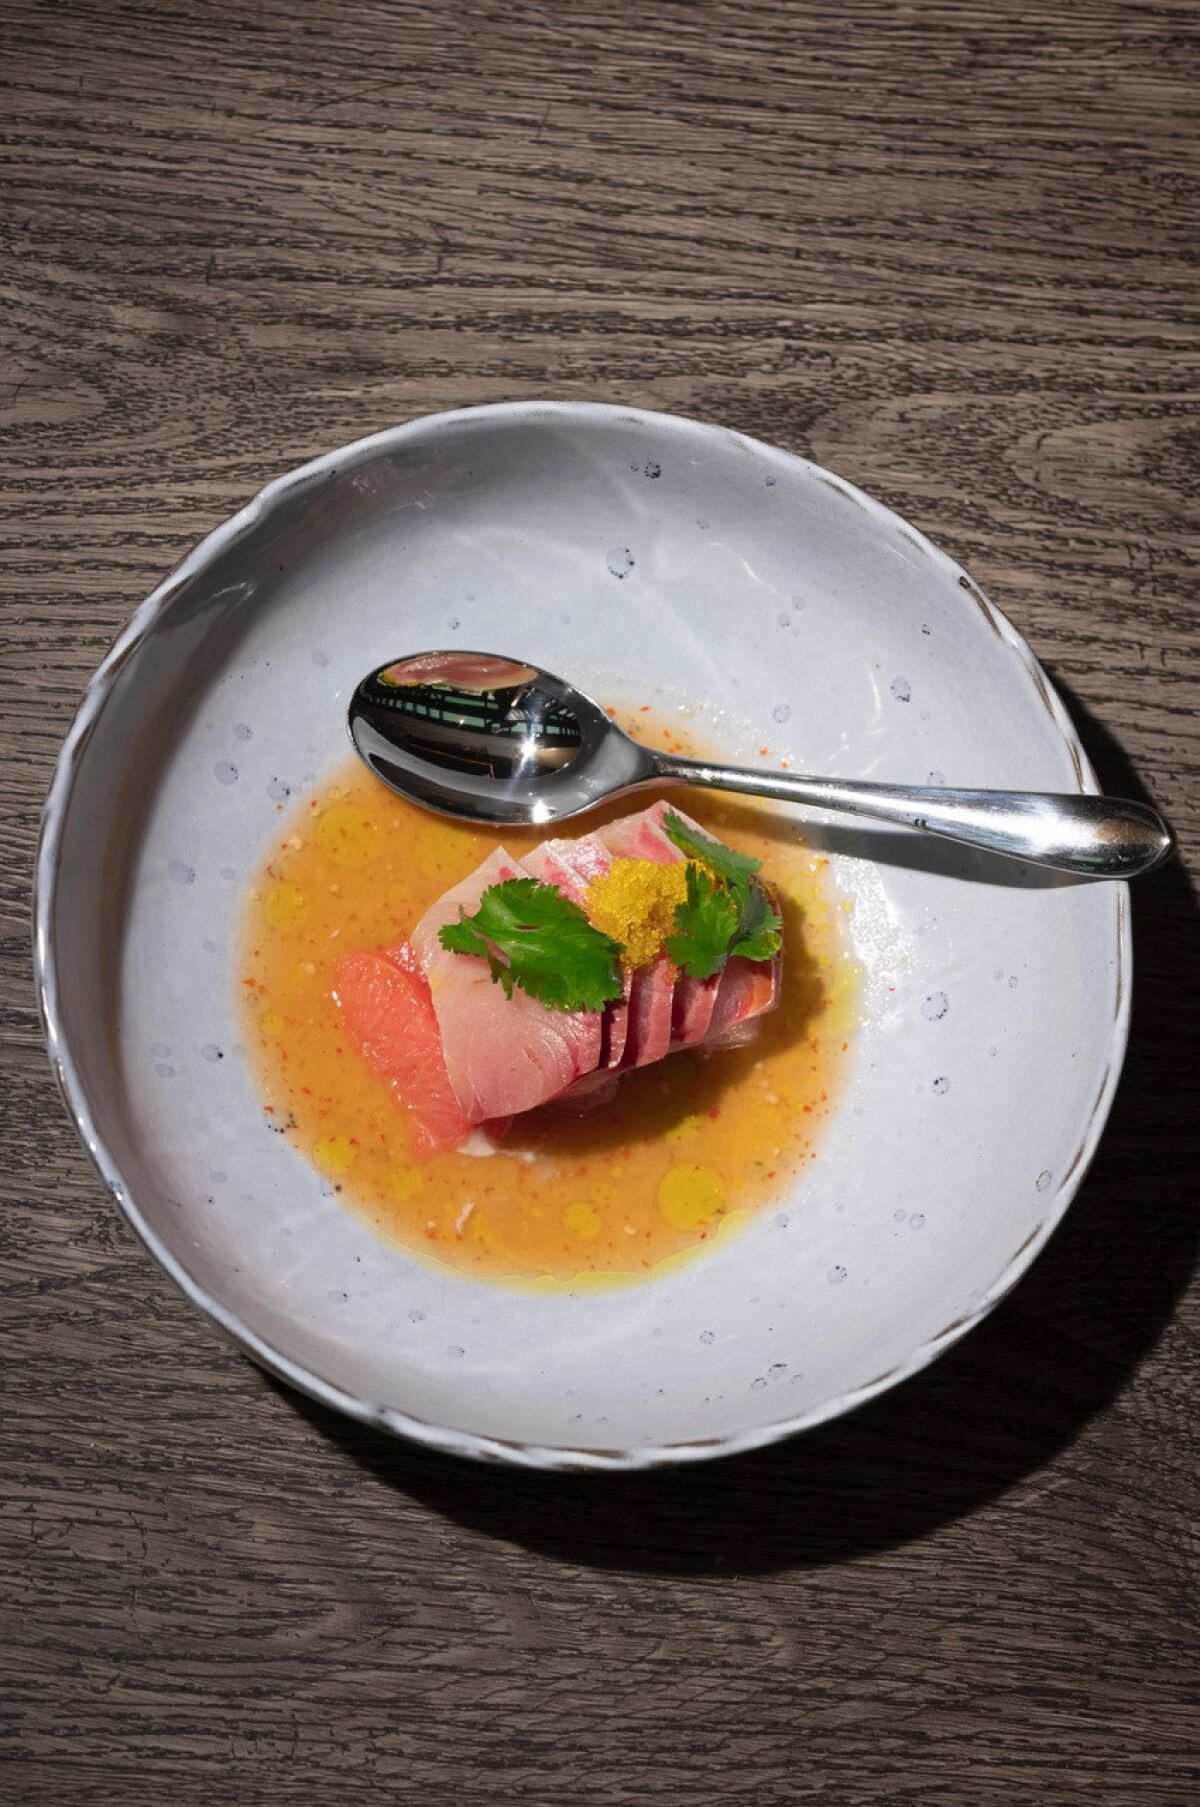 Kampachi Crudo, a new dish at Vistal Restaurant in San Diego, to raise money and awareness for the Stop AAPI Hate campaign.